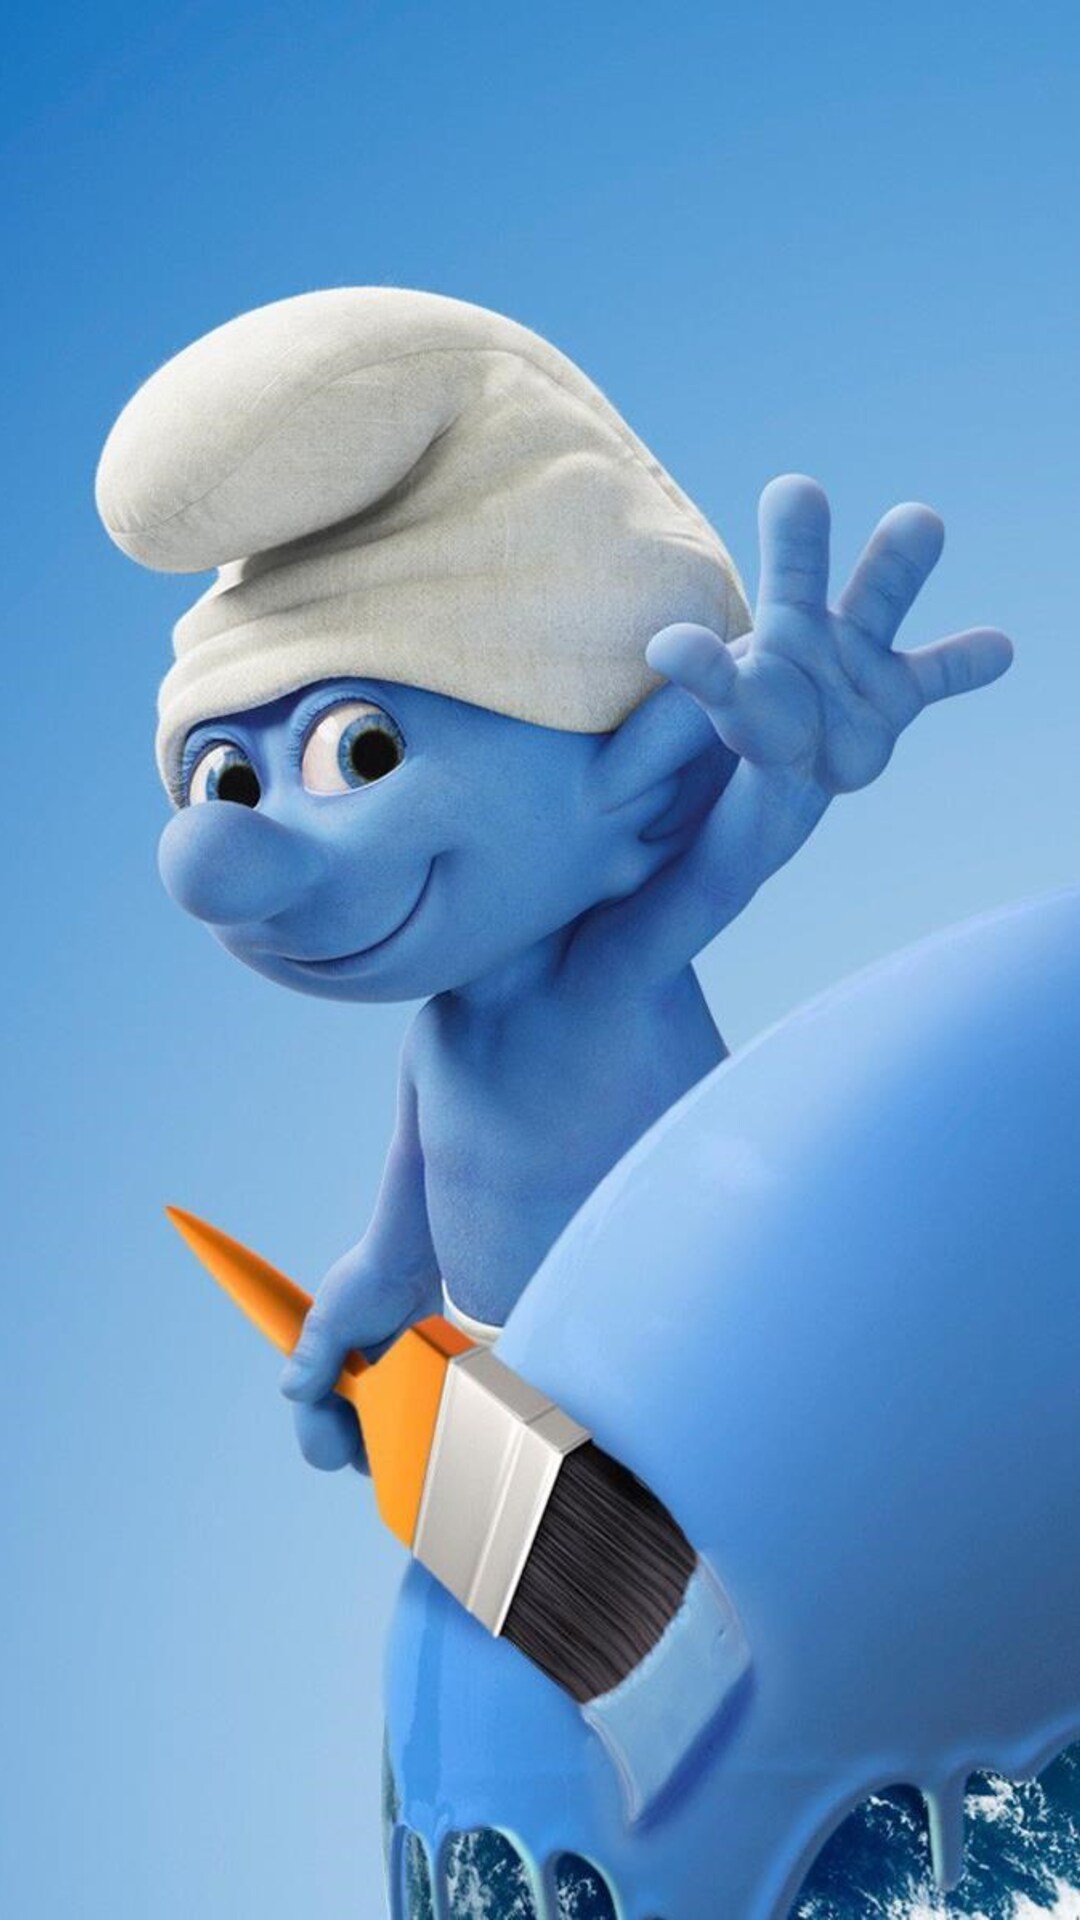 1080x1920 Smurfs The Lost Village Iphone 7,6s,6 Plus, Pixel xl ,One Plus  3,3t,5 HD 4k Wallpapers, Images, Backgrounds, Photos and Pictures